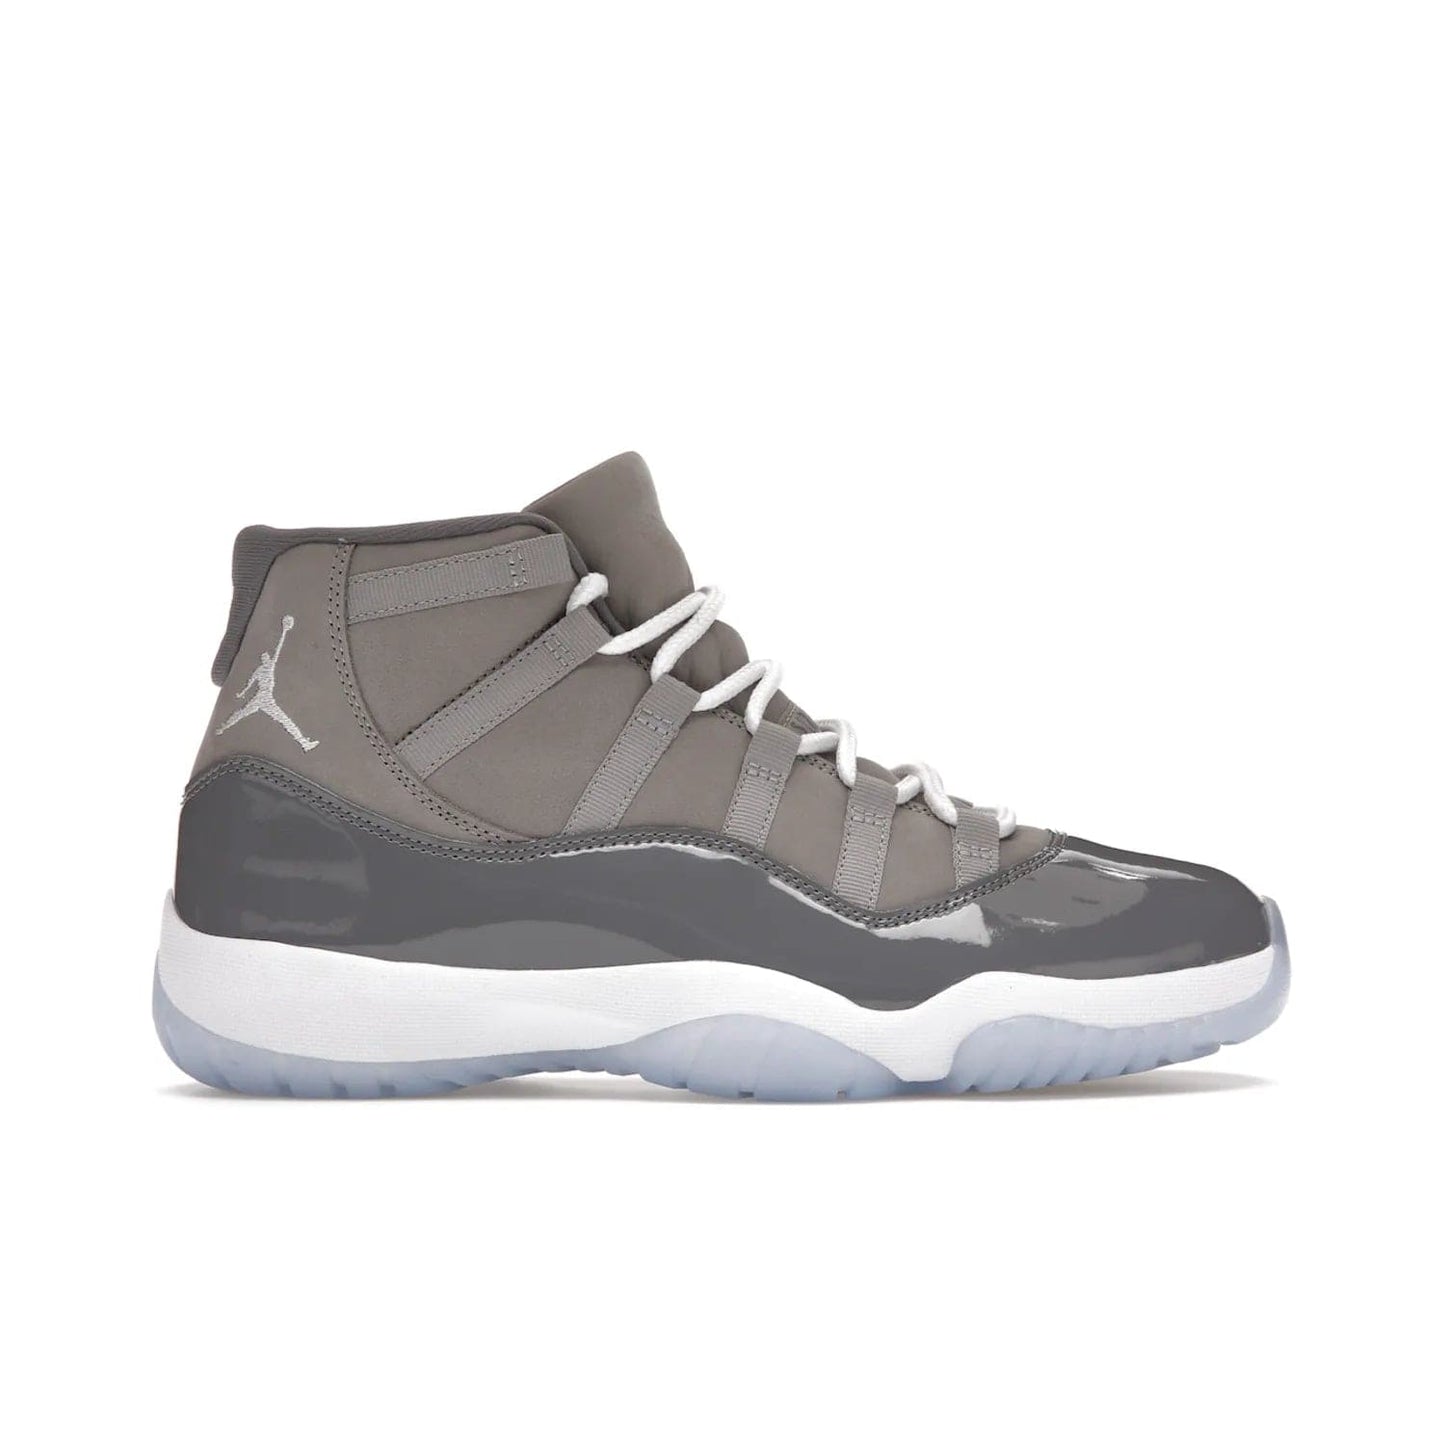 Jordan 11 Retro Cool Grey (2021) - Image 1 - Only at www.BallersClubKickz.com - Shop the Air Jordan 11 Retro Cool Grey (2021) for a must-have sneaker with a Cool Grey Durabuck upper, patent leather overlays, signature Jumpman embroidery, a white midsole, icy blue translucent outsole, and Multi-Color accents.  Released in December 2021 for $225.